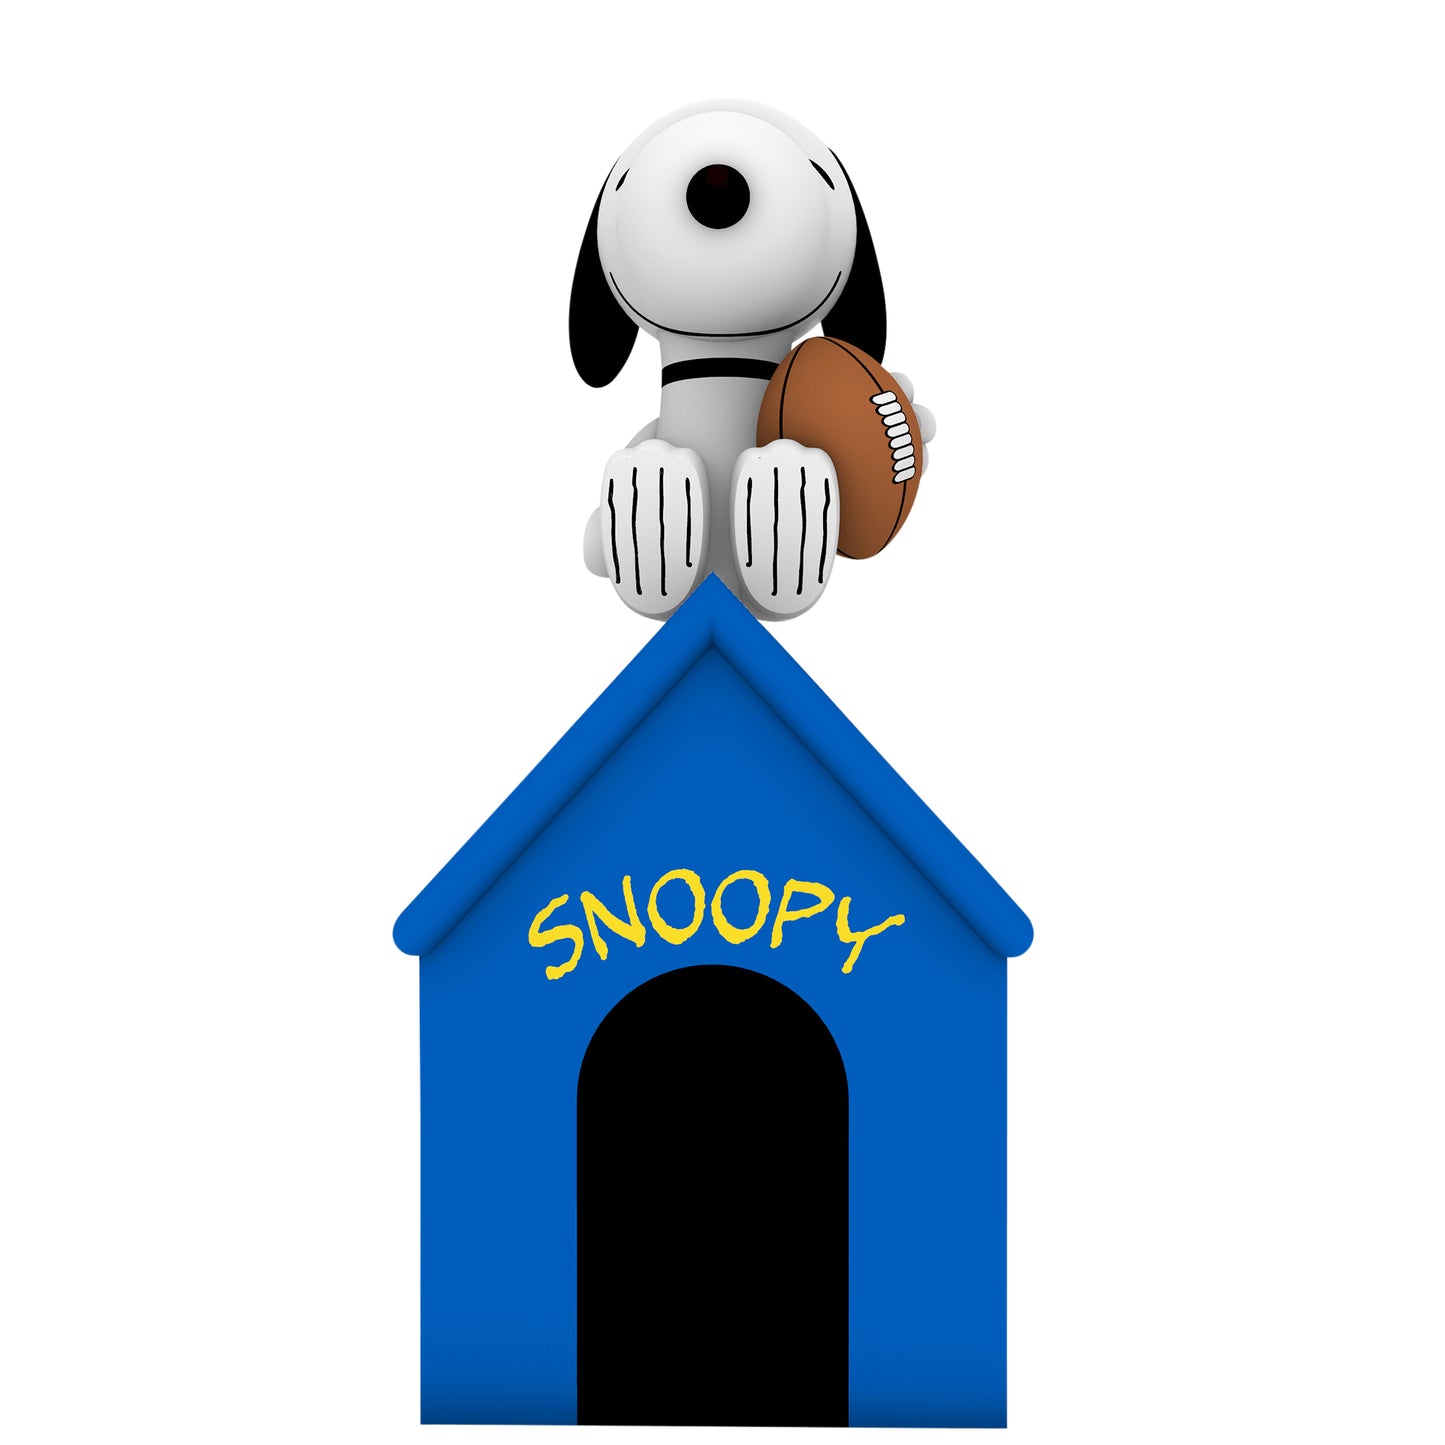 LOS ANGELES RAMS NFL INFLATABLE PEANUTS 5' SNOOPY DOG HOUSE